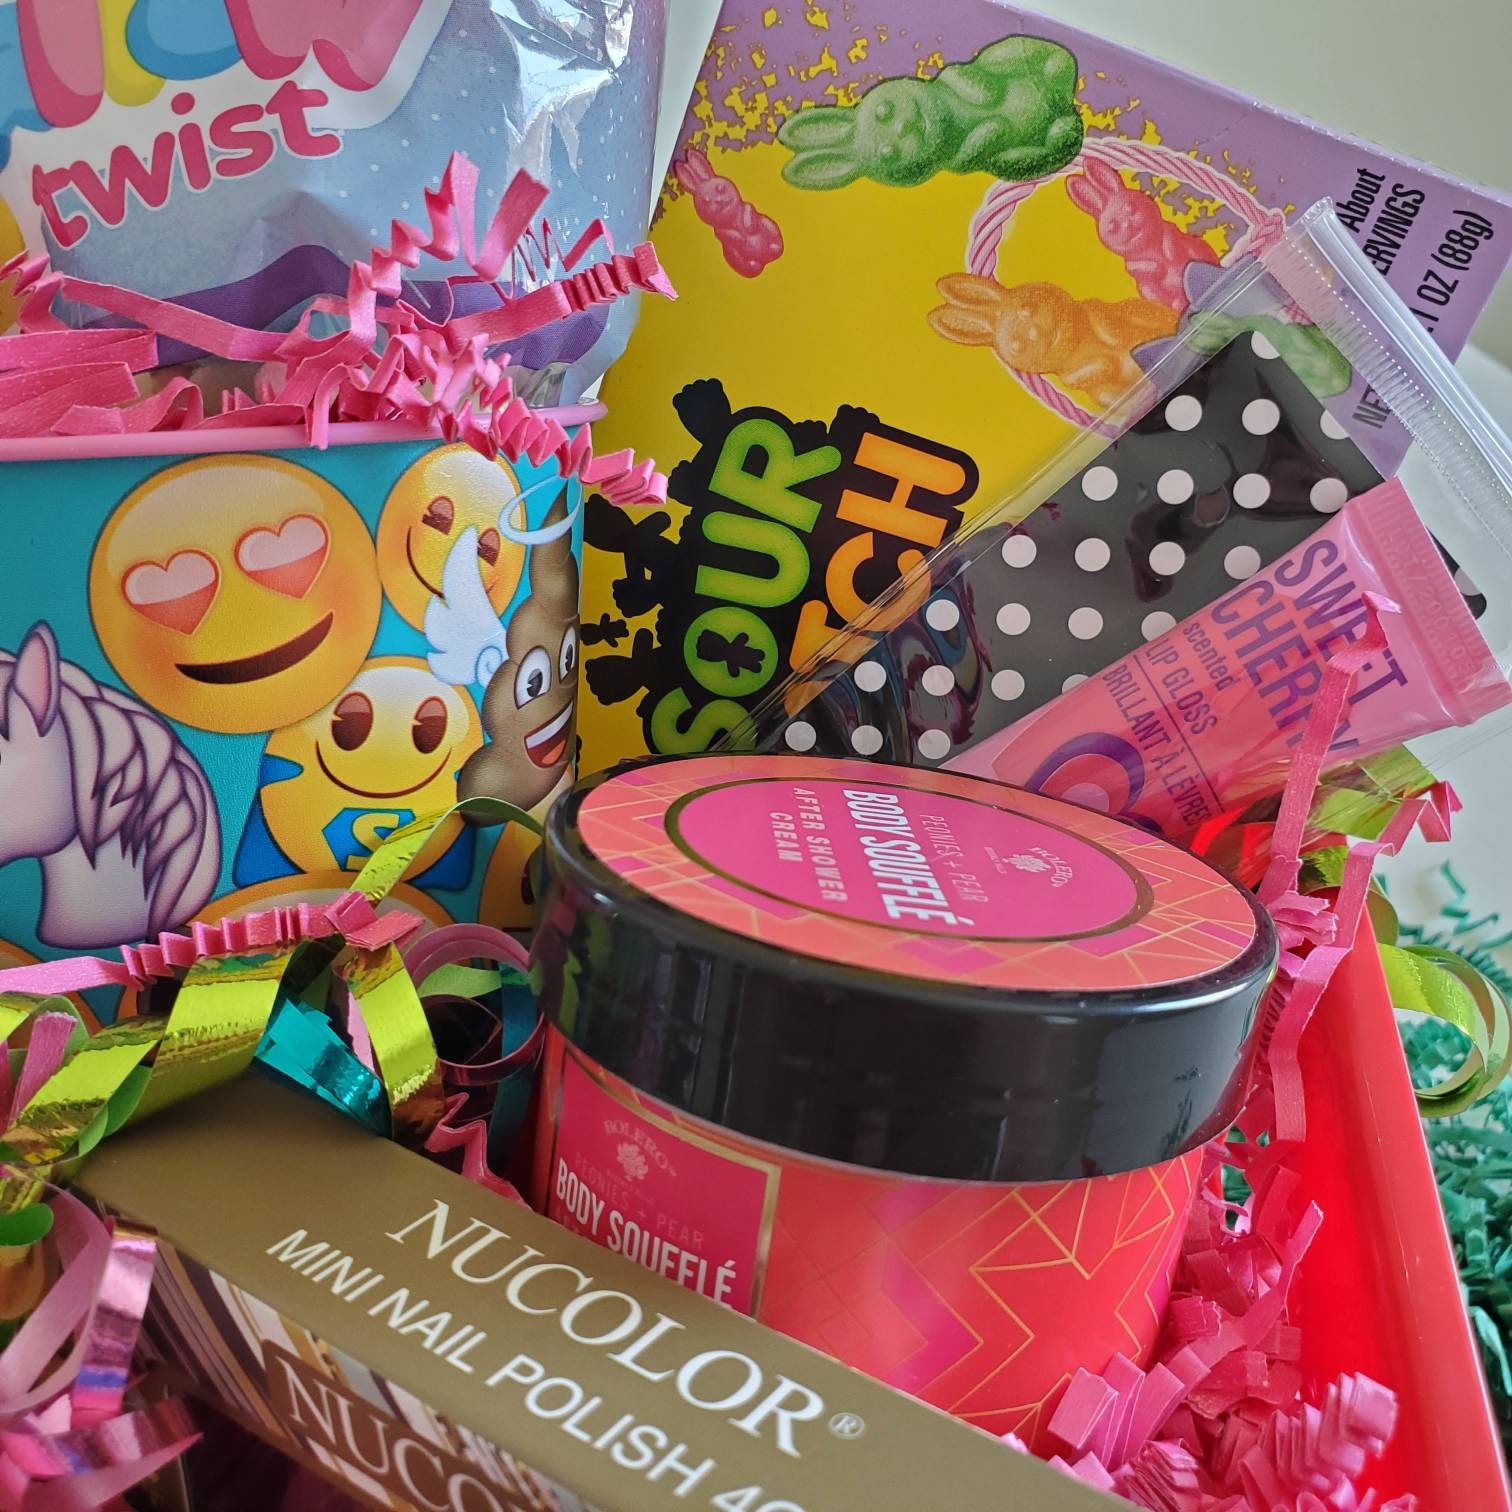 Gift Ideas for Teenage Girls ⋆ Sugar, Spice and Glitter